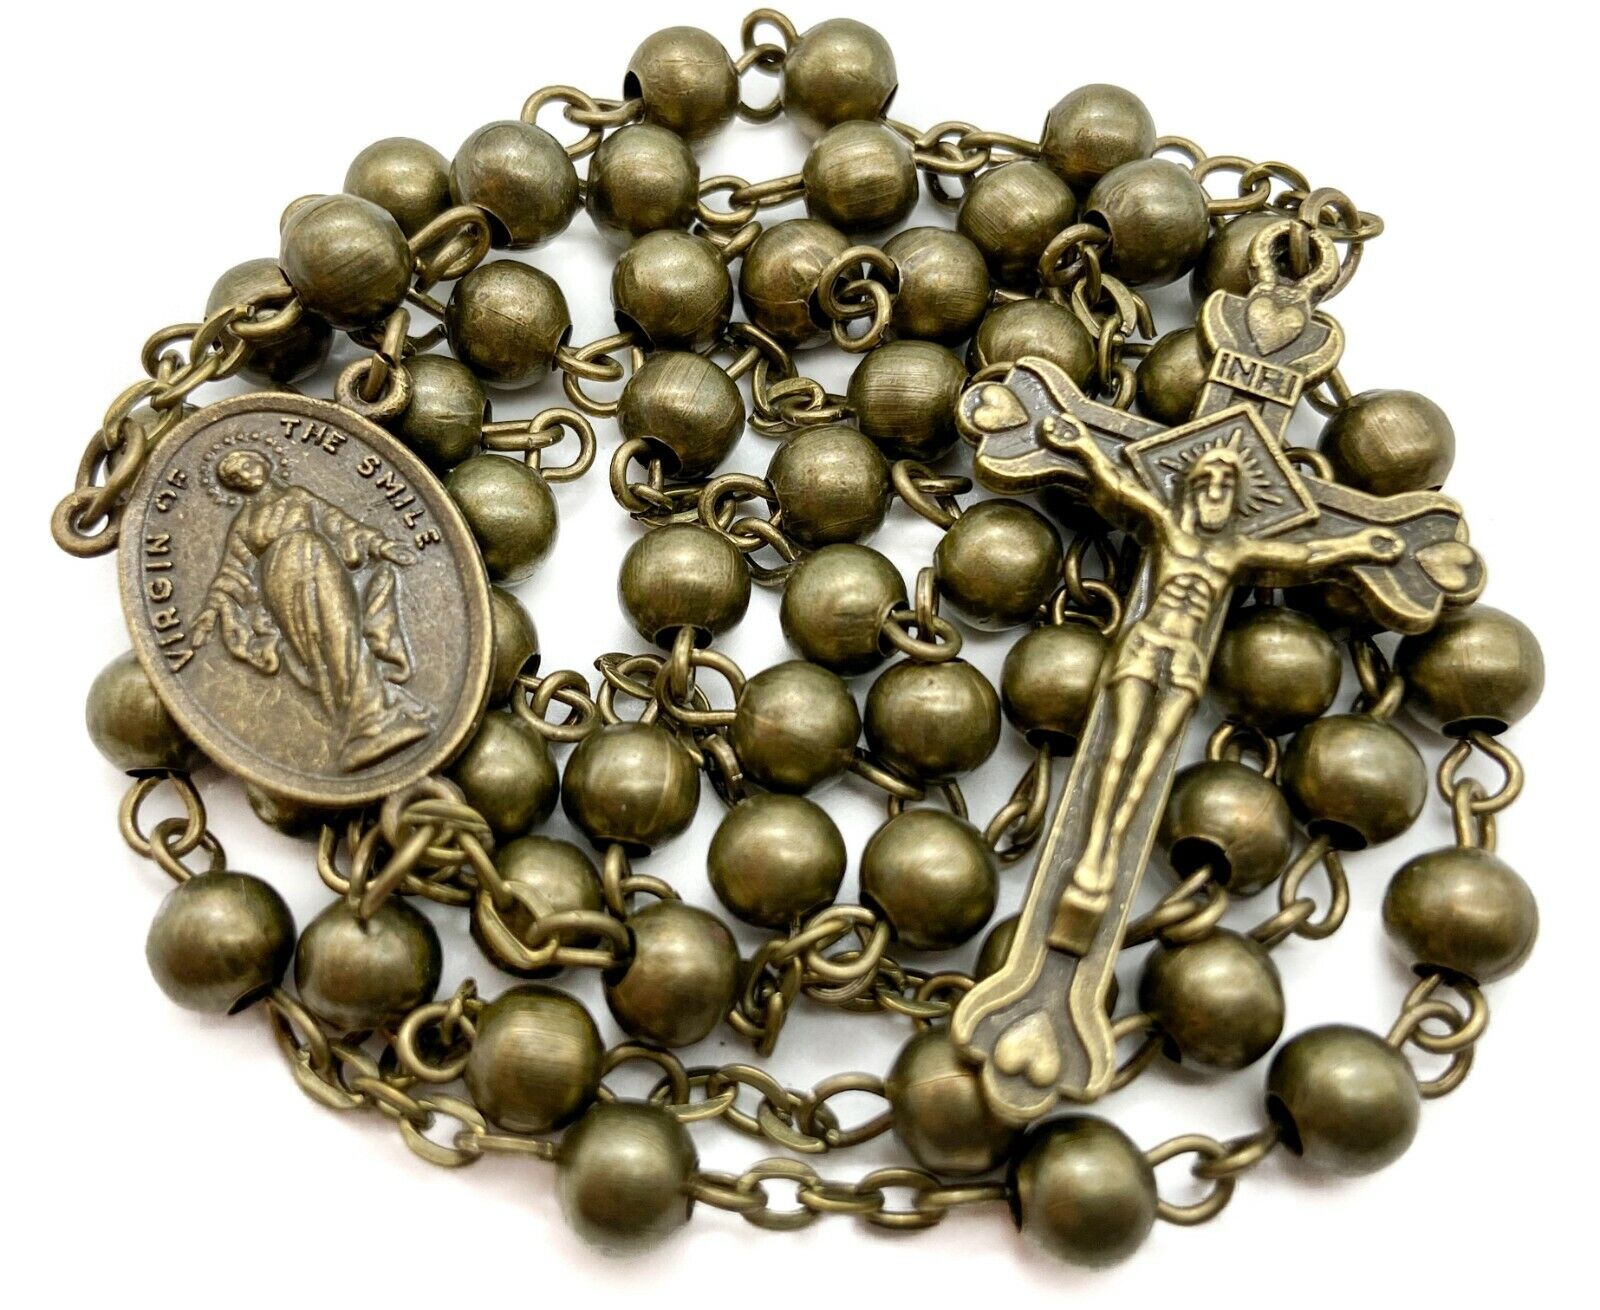 Metal Beads Combat Rosary Necklace St Therese Virgin Of The Smile Medal WW2